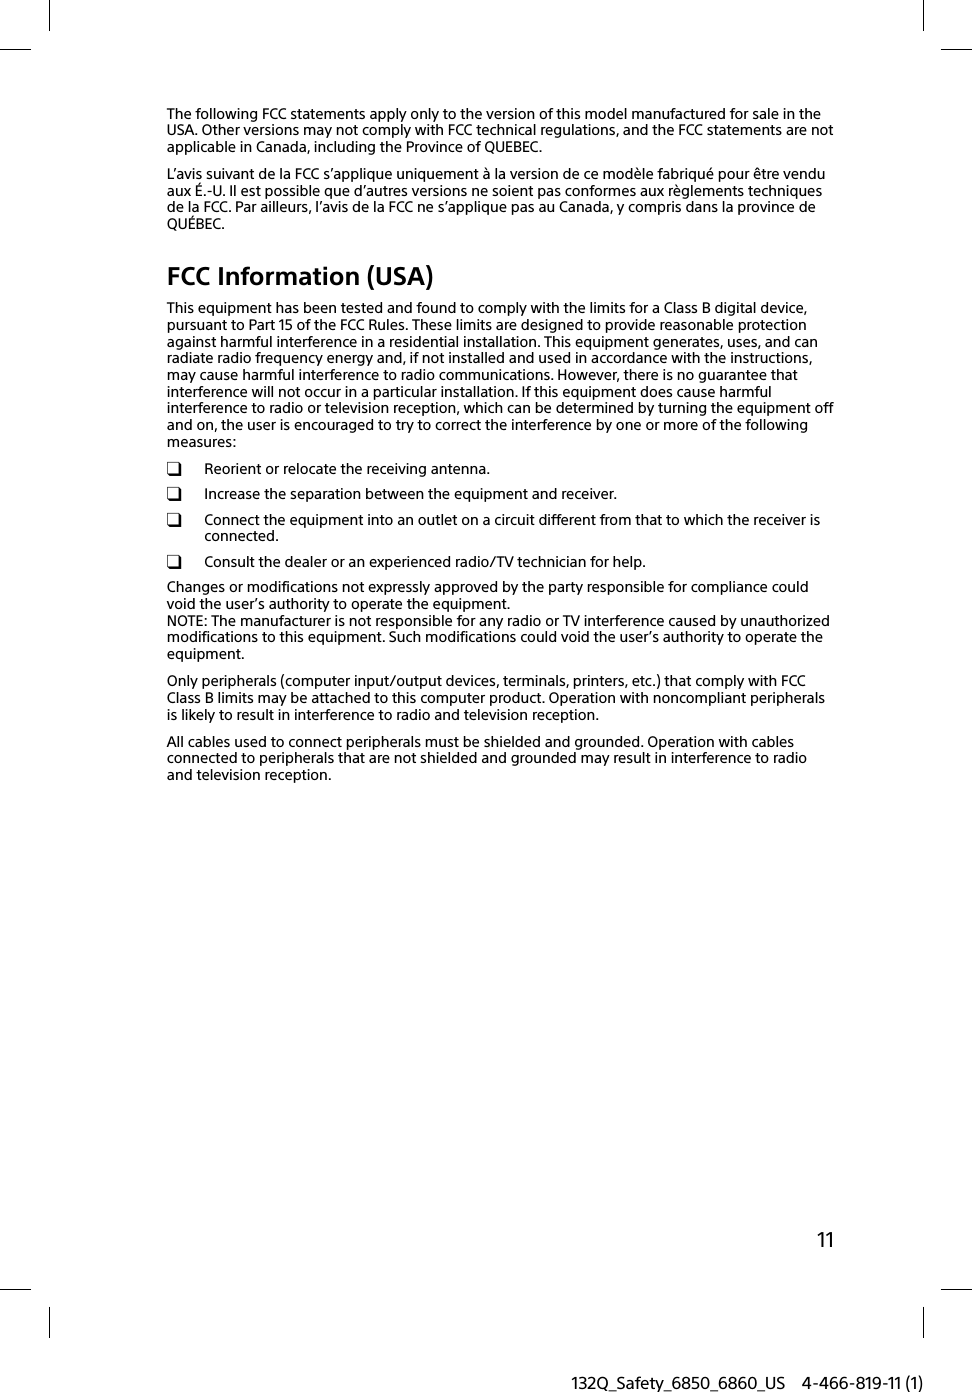 11132Q_Safety_6850_6860_US 4-466-819-11 (1)The following FCC statements apply only to the version of this model manufactured for sale in the USA. Other versions may not comply with FCC technical regulations, and the FCC statements are not applicable in Canada, including the Province of QUEBEC.L’avis suivant de la FCC s’applique uniquement à la version de ce modèle fabriqué pour être vendu aux É.-U. Il est possible que d’autres versions ne soient pas conformes aux règlements techniques de la FCC. Par ailleurs, l’avis de la FCC ne s’applique pas au Canada, y compris dans la province de QUÉBEC.FCC Information (USA)This equipment has been tested and found to comply with the limits for a Class B digital device, pursuant to Part 15 of the FCC Rules. These limits are designed to provide reasonable protection against harmful interference in a residential installation. This equipment generates, uses, and can radiate radio frequency energy and, if not installed and used in accordance with the instructions, may cause harmful interference to radio communications. However, there is no guarantee that interference will not occur in a particular installation. If this equipment does cause harmful interference to radio or television reception, which can be determined by turning the equipment off and on, the user is encouraged to try to correct the interference by one or more of the following measures:  Reorient or relocate the receiving antenna.  Increase the separation between the equipment and receiver.  Connect the equipment into an outlet on a circuit different from that to which the receiver is connected.  Consult the dealer or an experienced radio/TV technician for help.Changes or modifications not expressly approved by the party responsible for compliance could void the user’s authority to operate the equipment.NOTE: The manufacturer is not responsible for any radio or TV interference caused by unauthorized modifications to this equipment. Such modifications could void the user’s authority to operate the equipment.Only peripherals (computer input/output devices, terminals, printers, etc.) that comply with FCC Class B limits may be attached to this computer product. Operation with noncompliant peripherals is likely to result in interference to radio and television reception.All cables used to connect peripherals must be shielded and grounded. Operation with cables connected to peripherals that are not shielded and grounded may result in interference to radio and television reception.